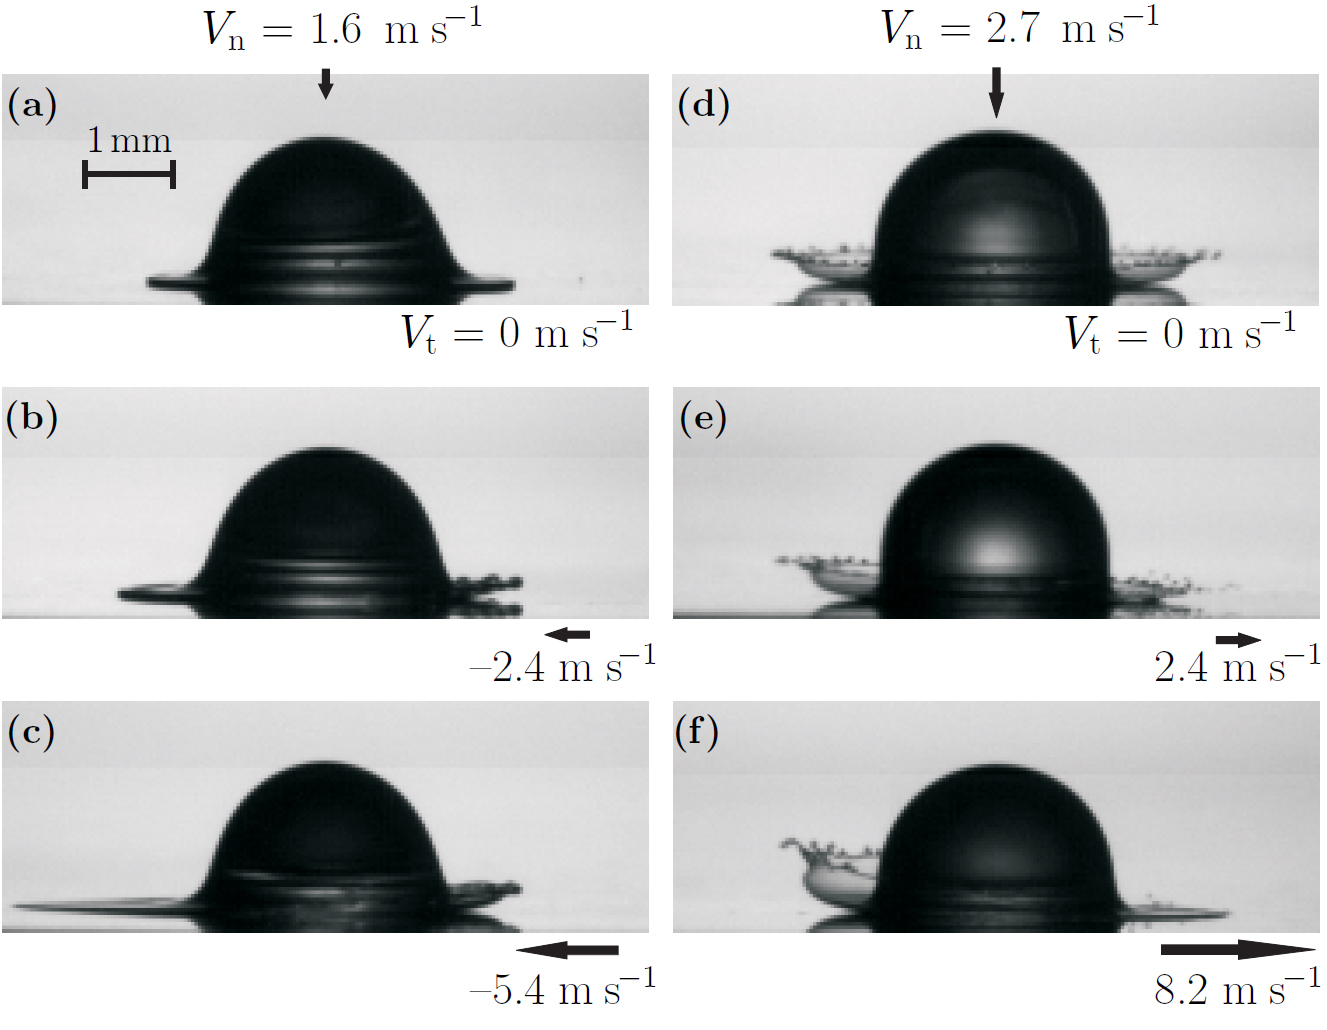 Images of different droplet splashing configurations.